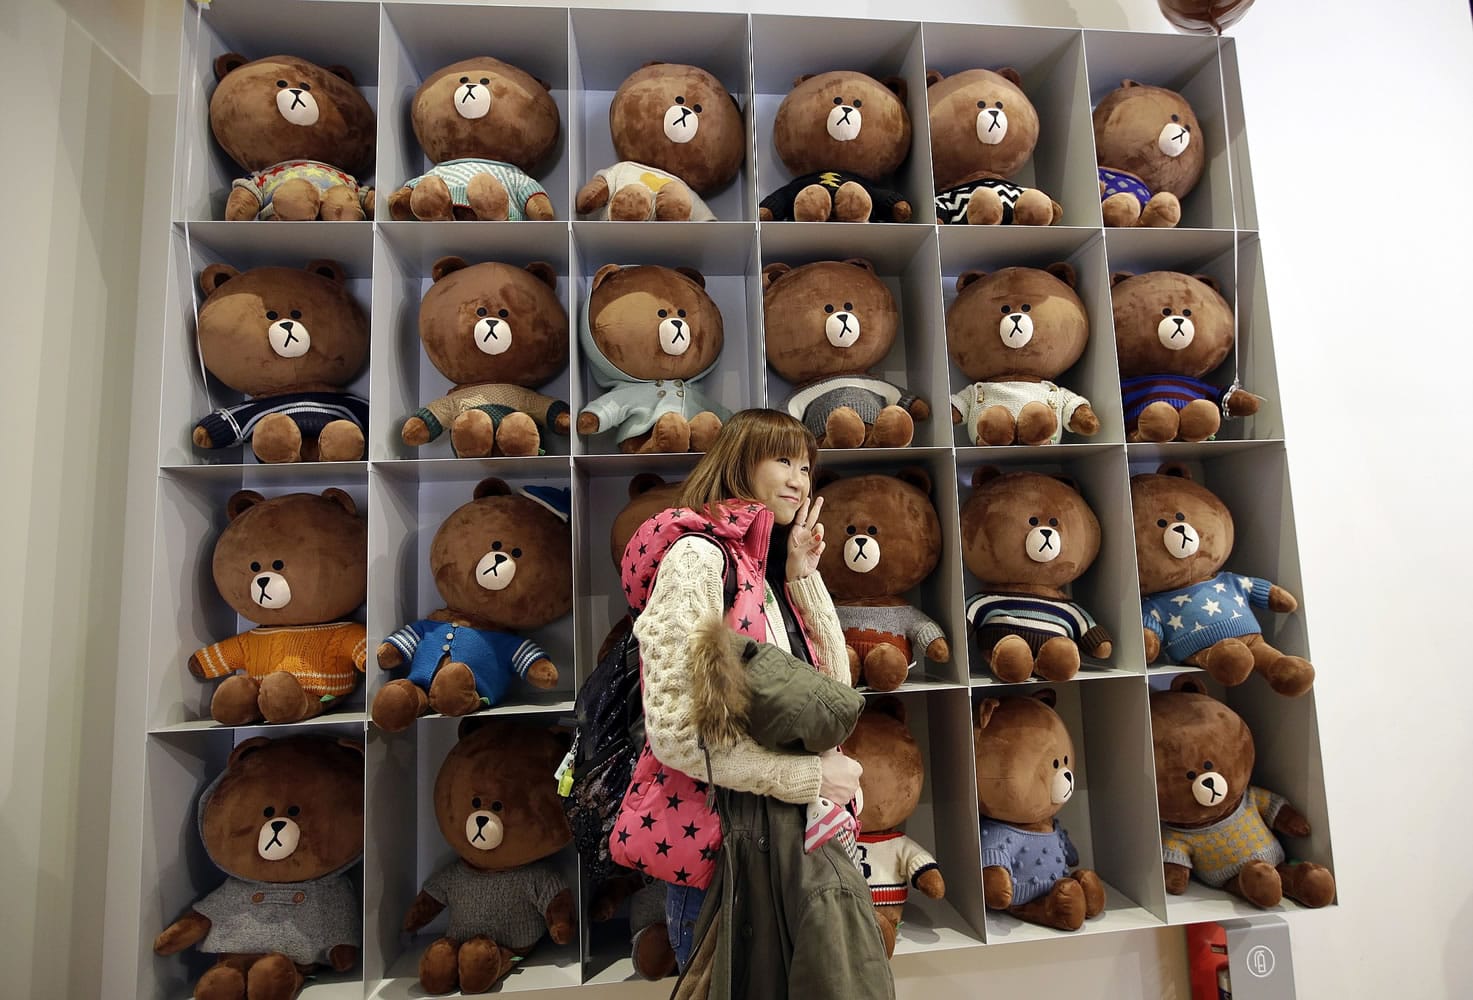 A tourist from Hong Kong poses for her souvenir photo in front of a display of Line's character Brown bear at the Line Friends flagship shop in Seoul, South Korea.